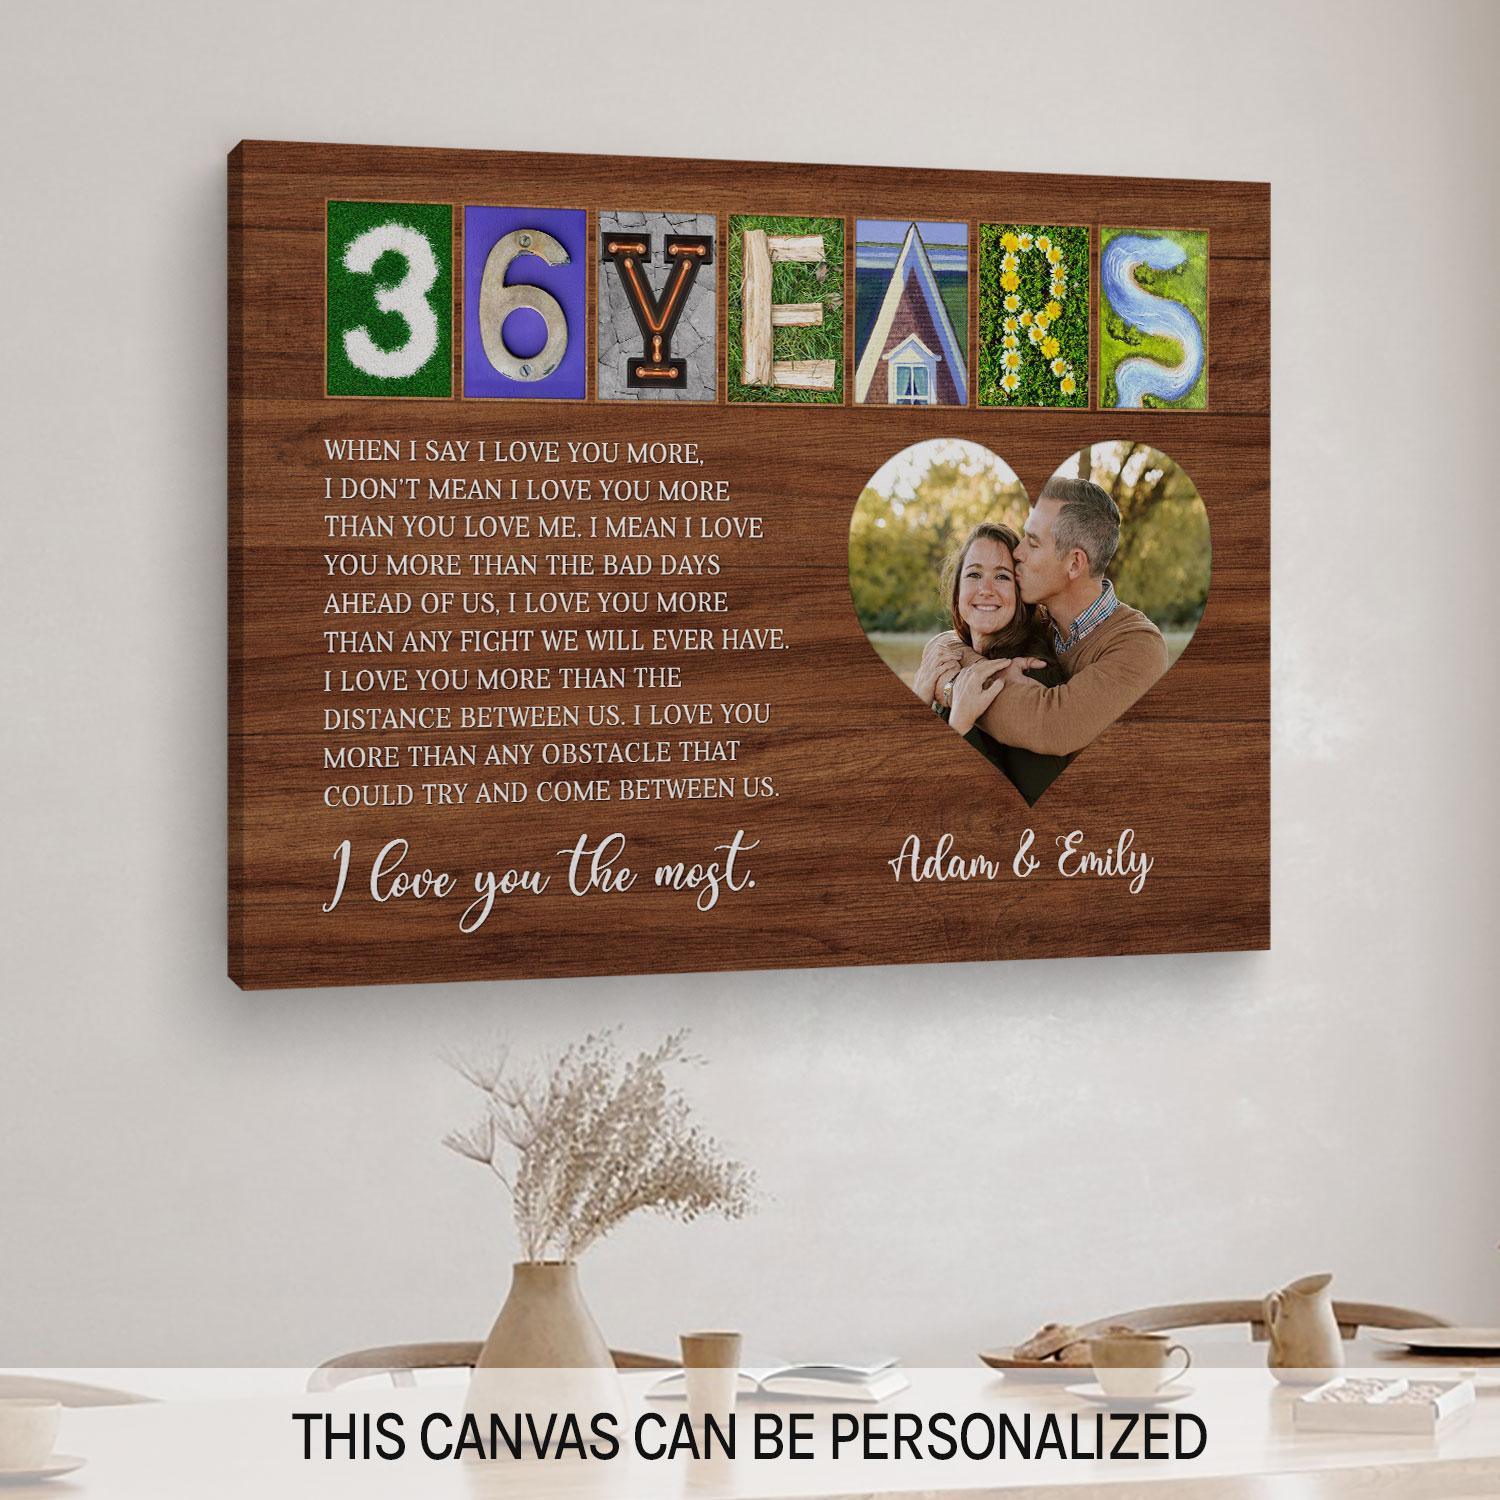 36 Years - Personalized 36 Year Anniversary gift For Husband or Wife - Custom Canvas Print - MyMindfulGifts